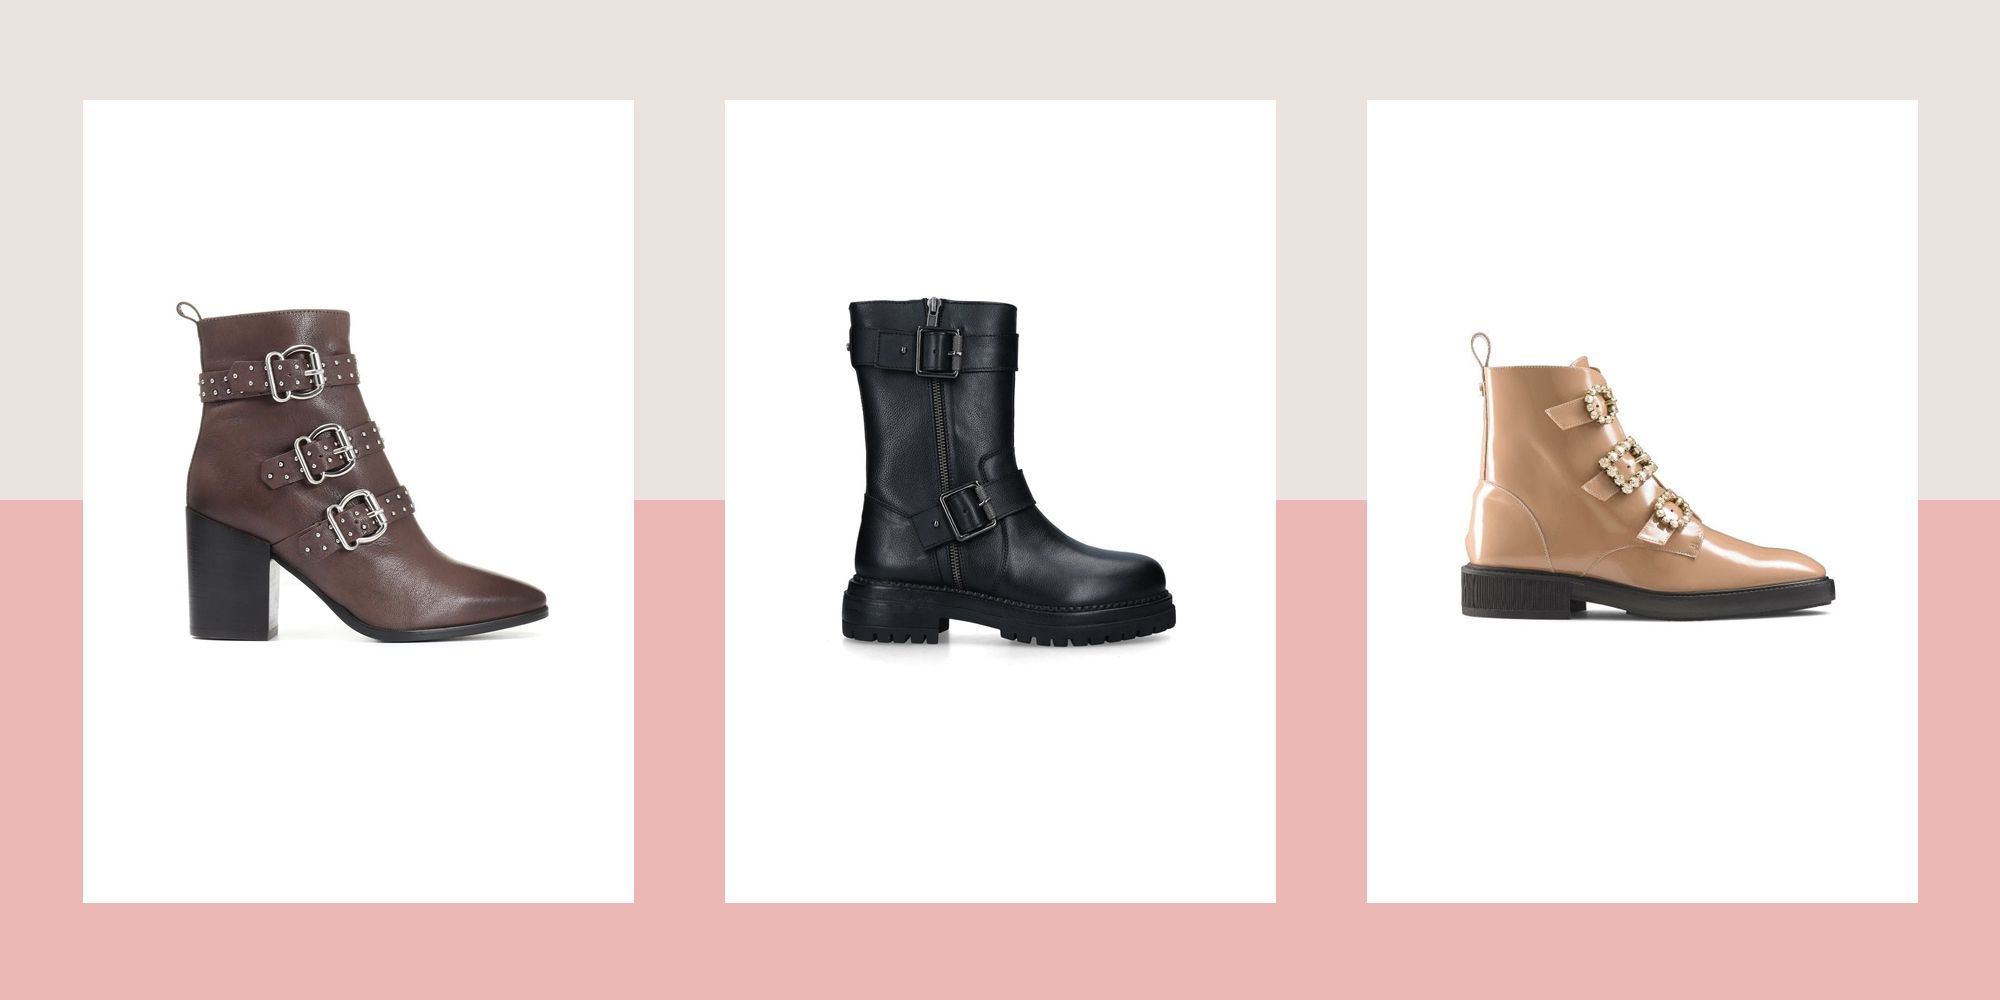 biker boots russell and bromley